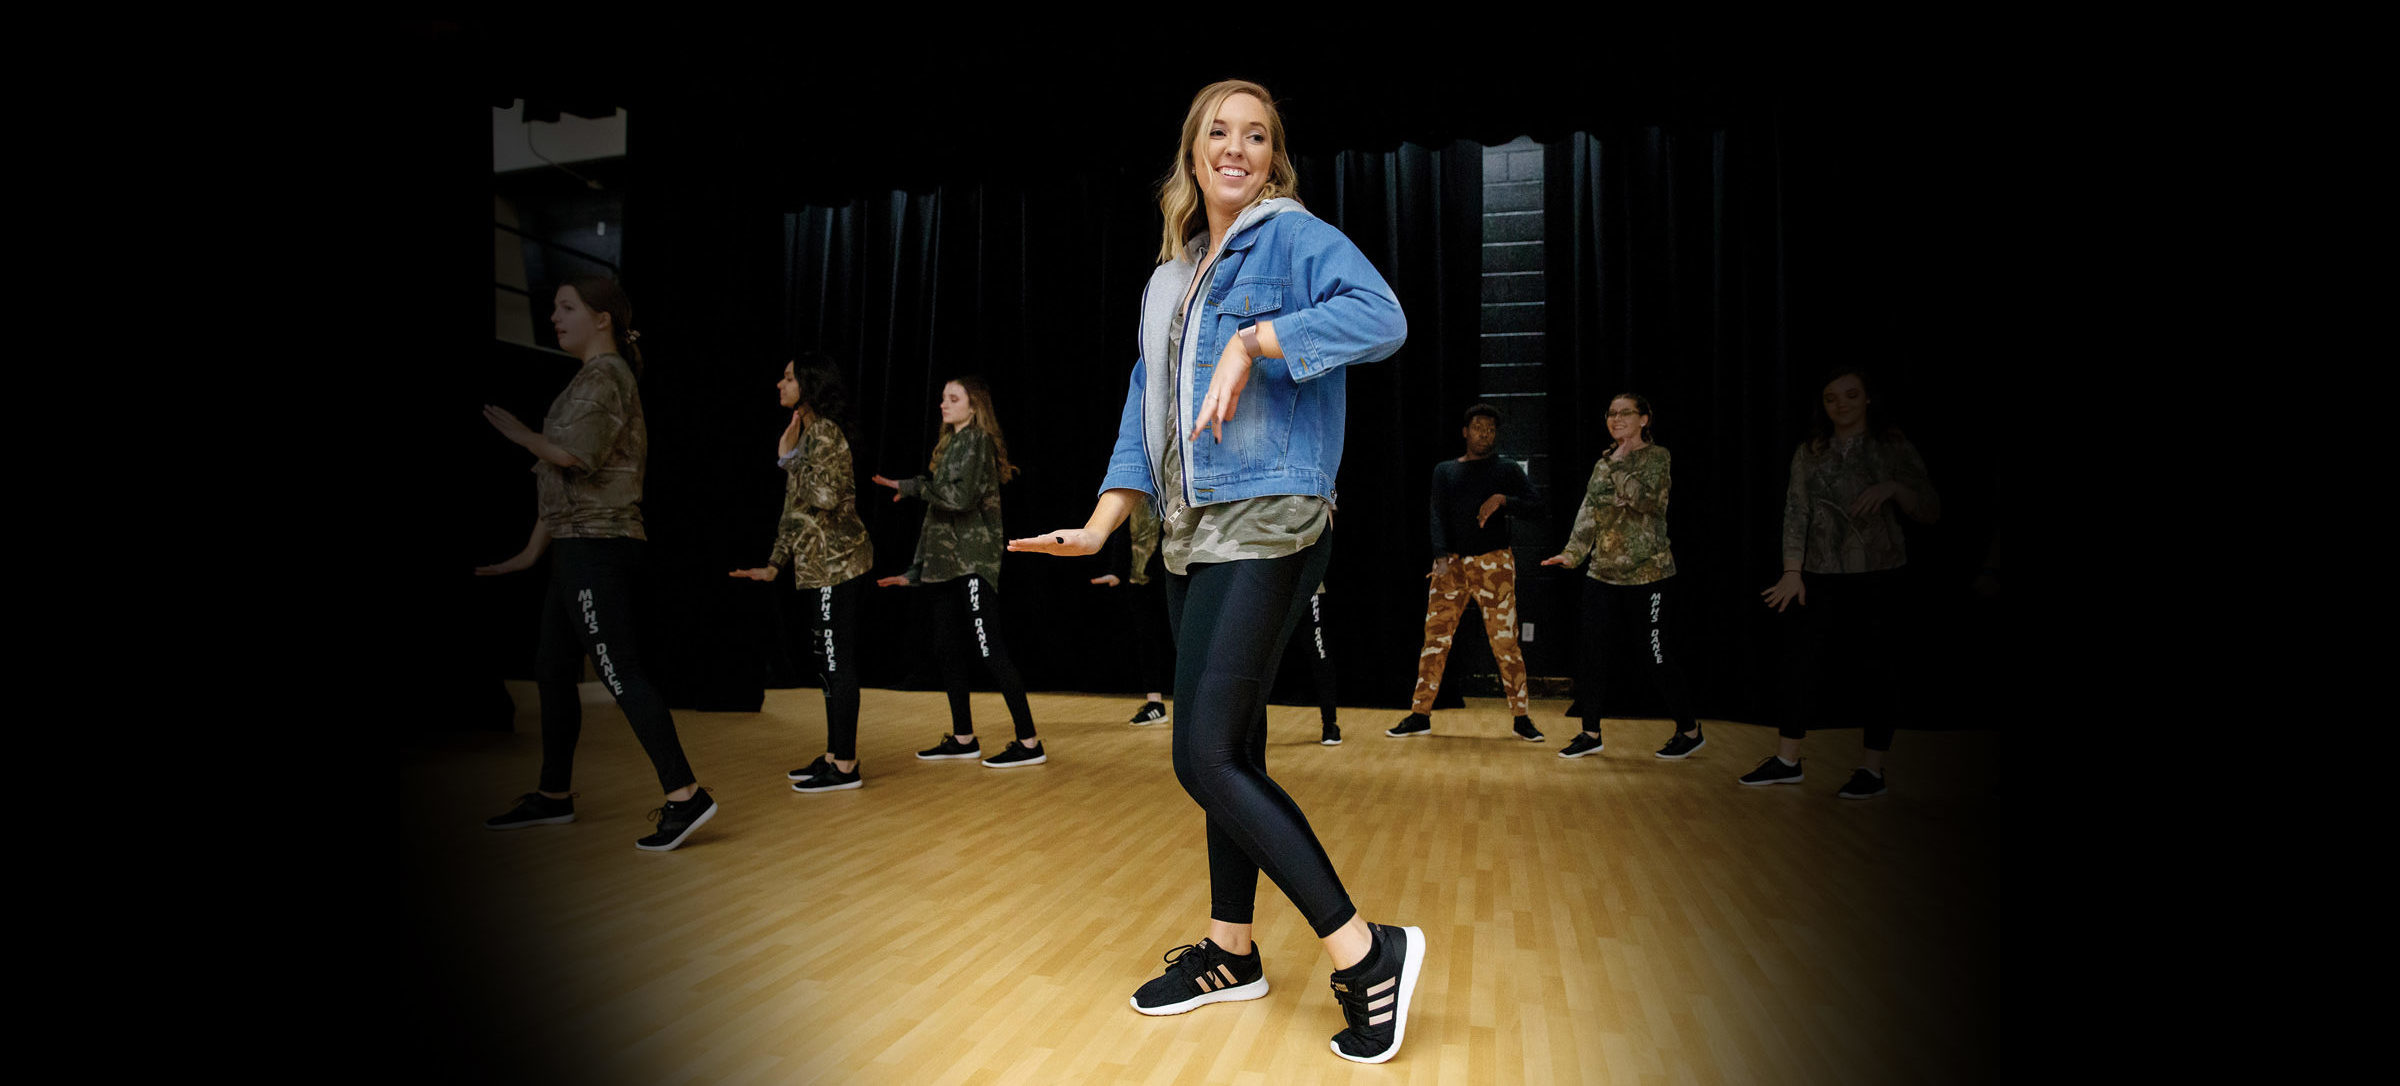 Abby Murphy points her left toe, instructing a row of dance students behind her